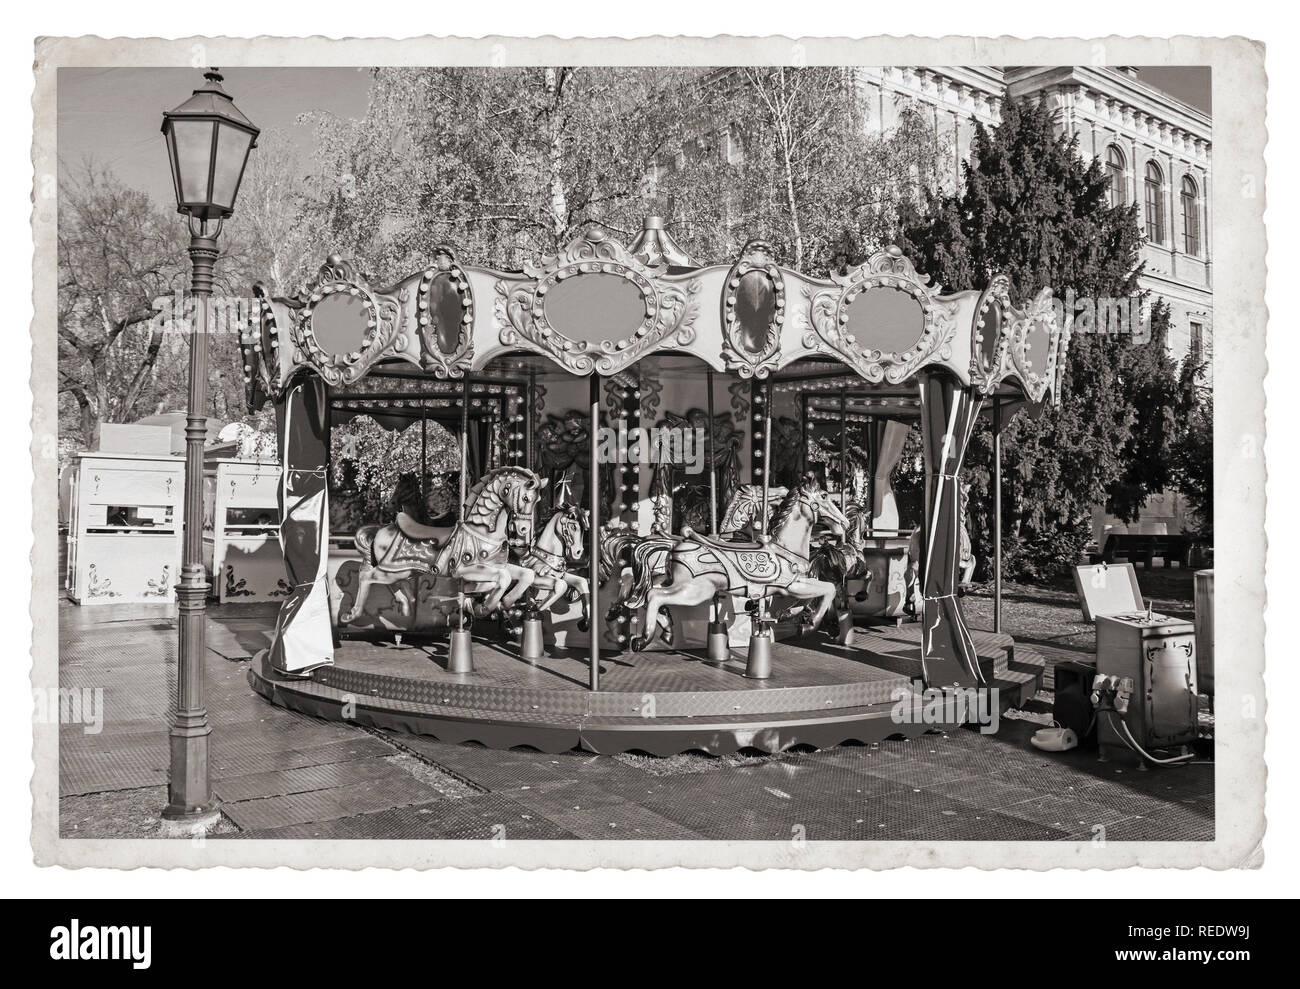 Old fashioned french carousel with horses Vintage Monochrome photo Stock Photo